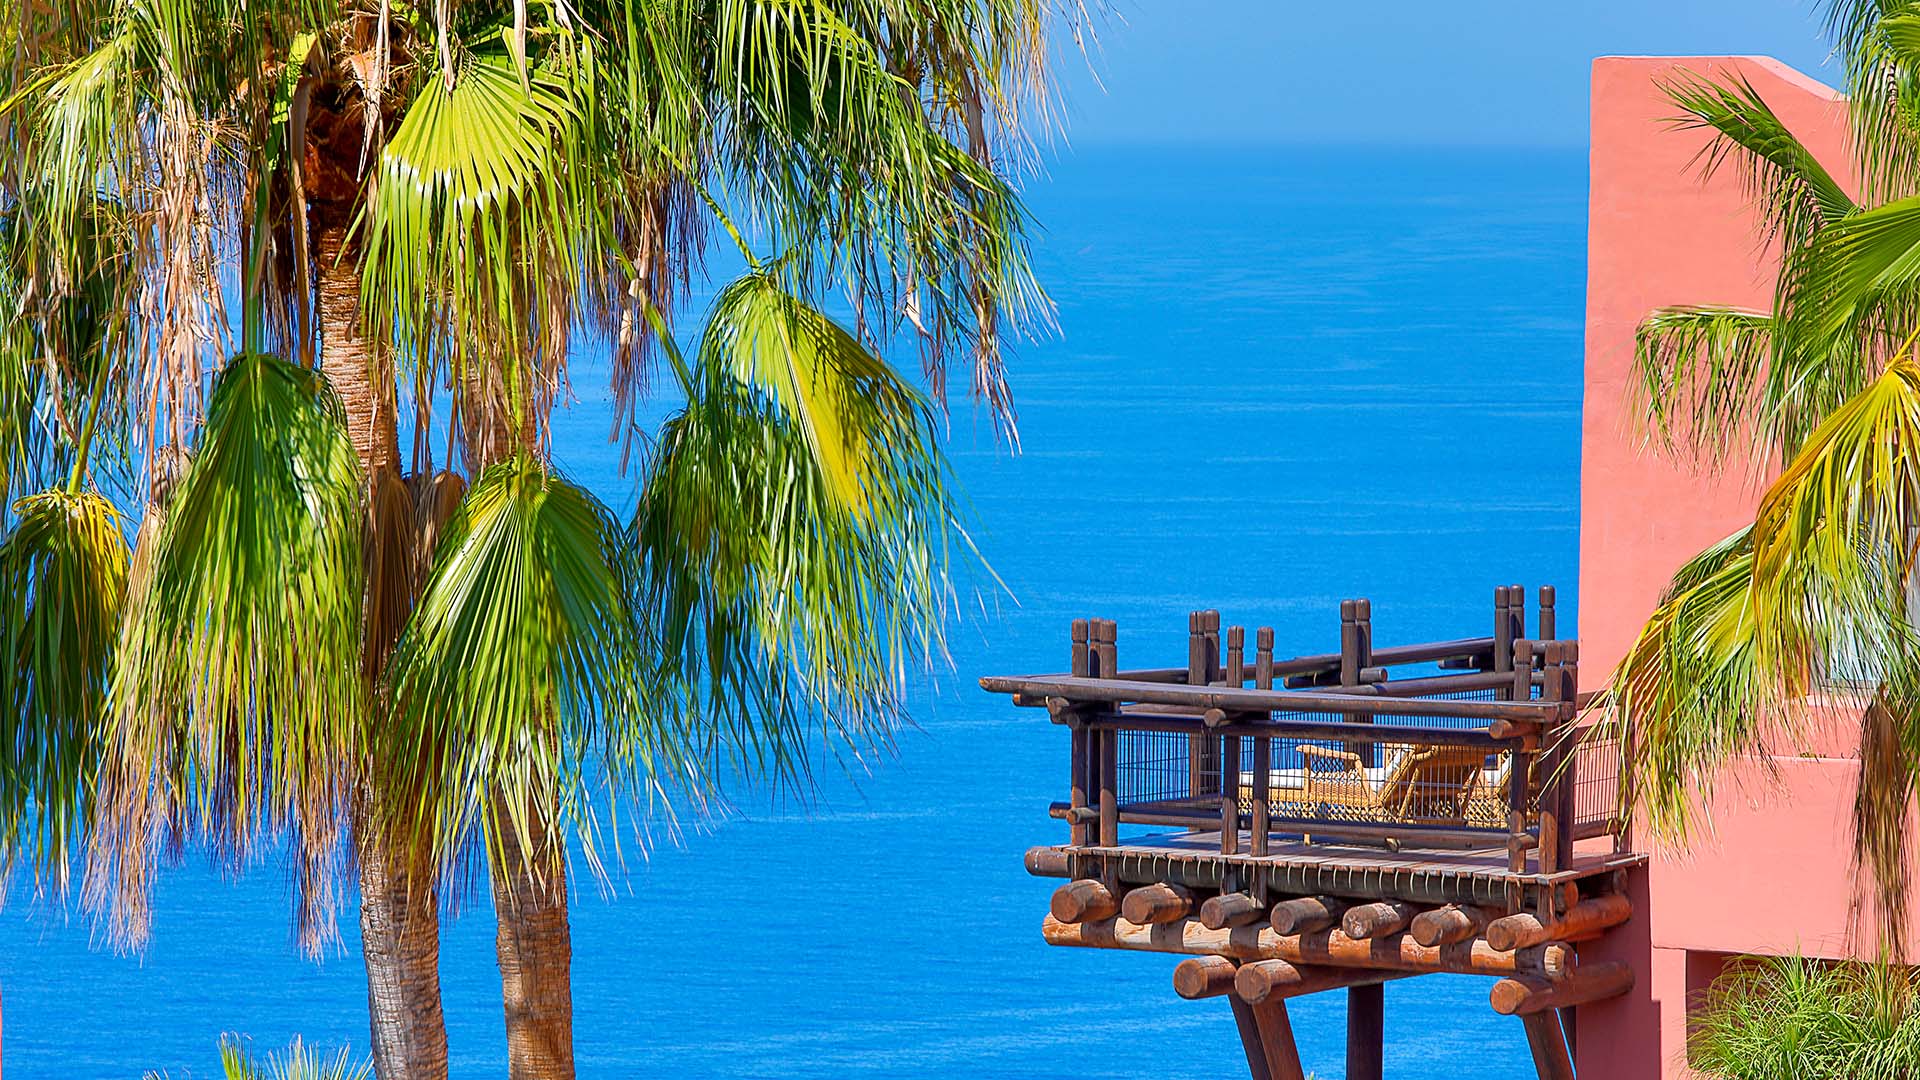 view of a palm tree and balcony at the The Ritz-Carlton Tenerife, Abama, with the blue ocean in the background